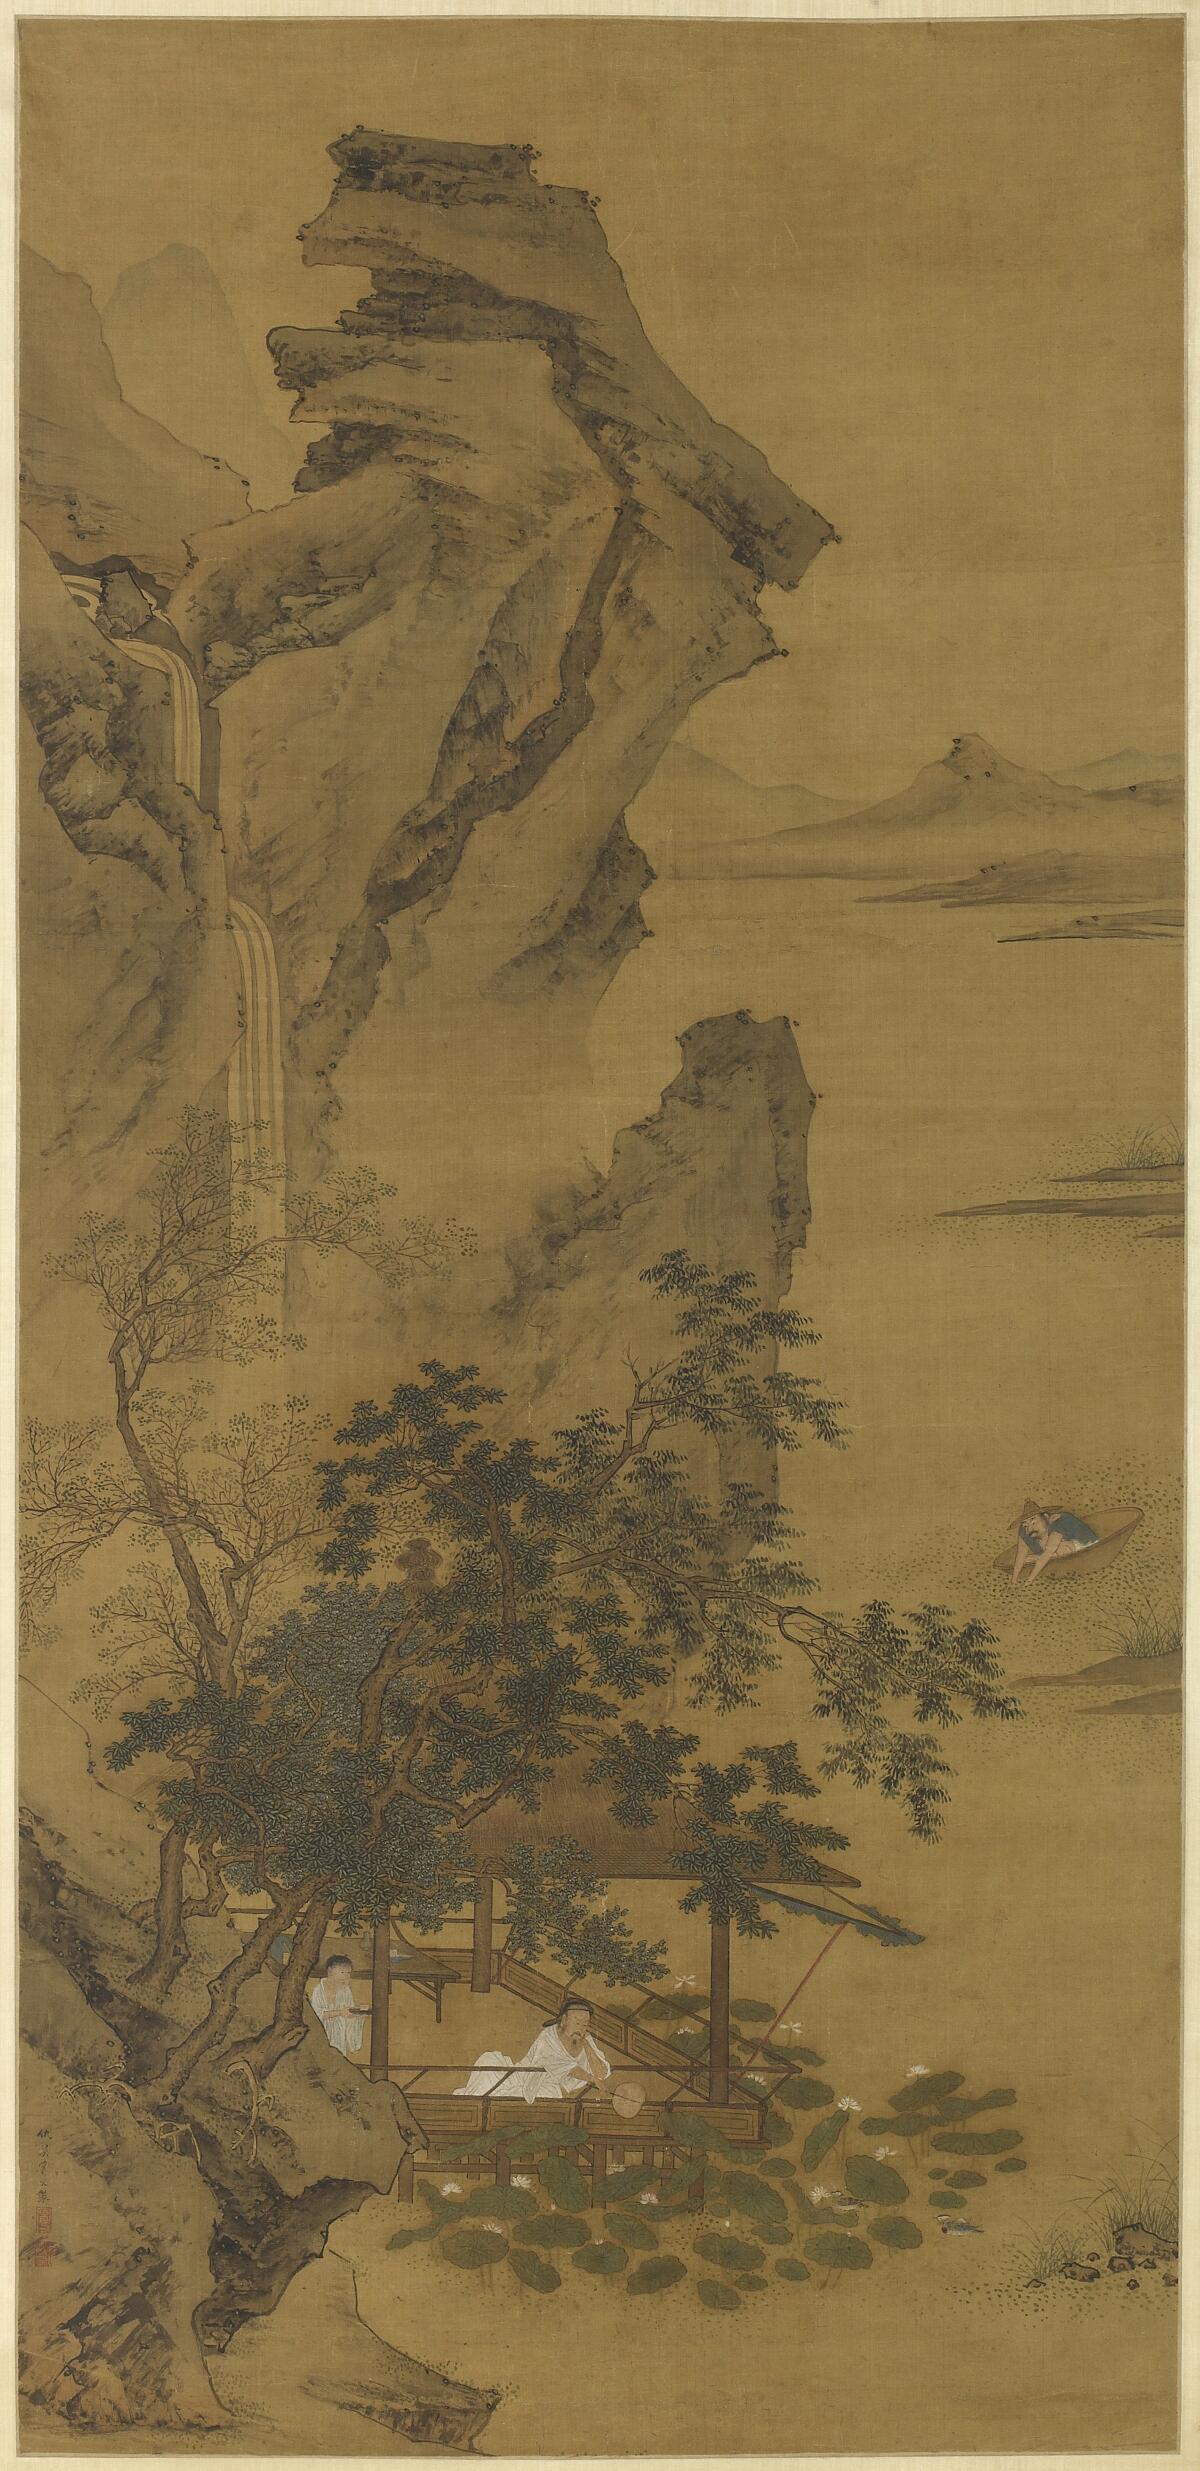 A silk scroll showing a dramatic landscape, a philosopher, a young servant, a lake with a farmer in a boat and a waterfall.